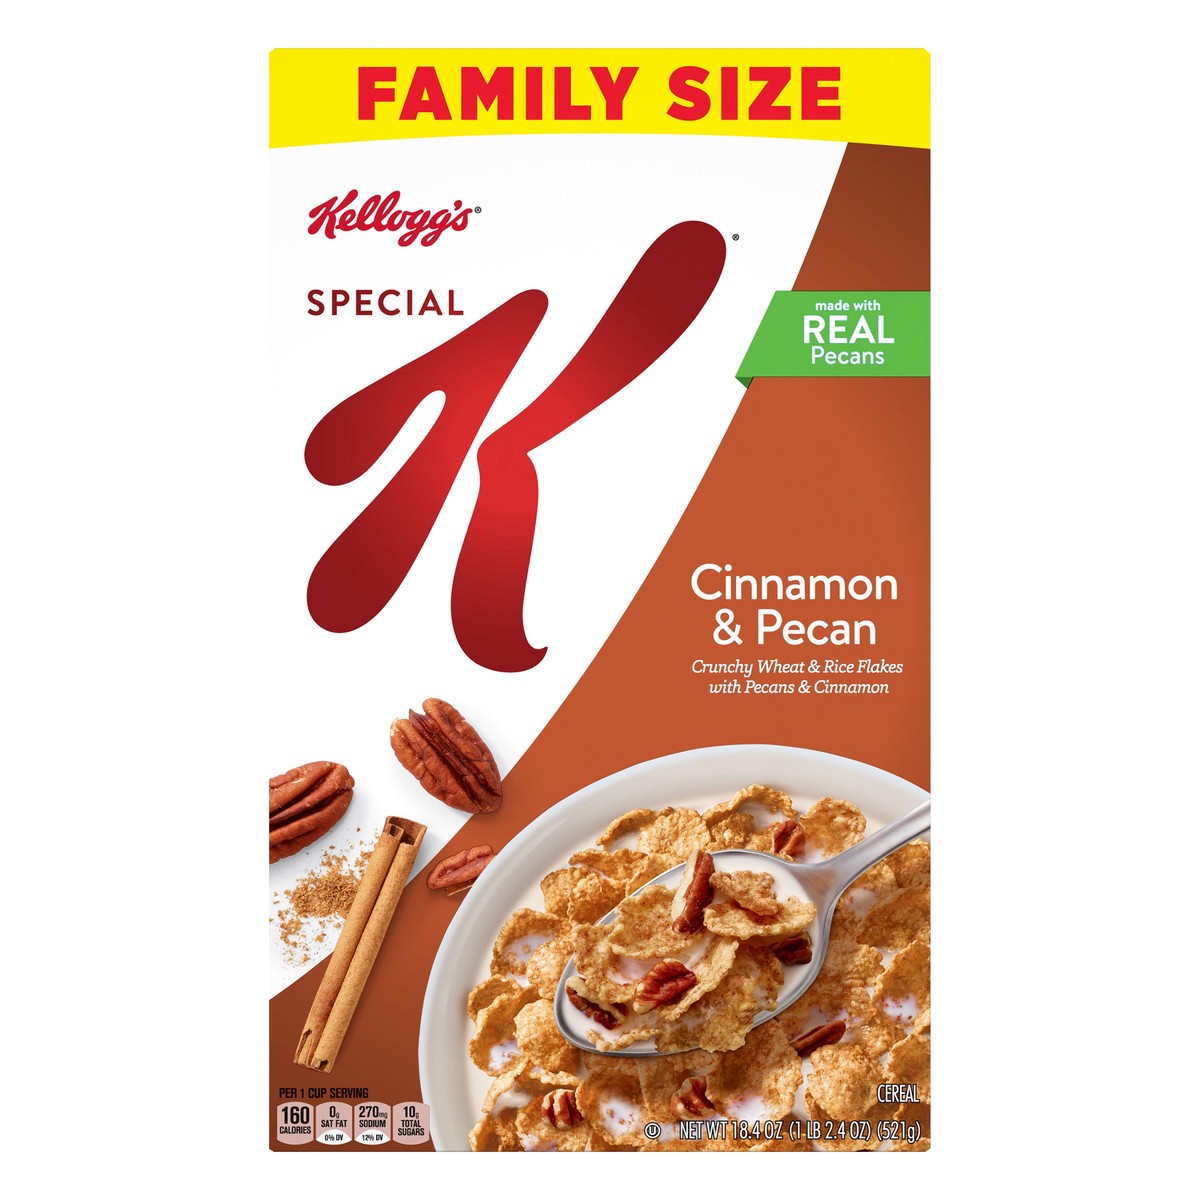 slide 1 of 7, Special K Kellogg's Special K Breakfast Cereal, 11 Vitamins and Minerals, Made with Real Pecans, Family Size, Cinnamon and Pecan, 18.4oz Box, 1 Box, 18.4 oz